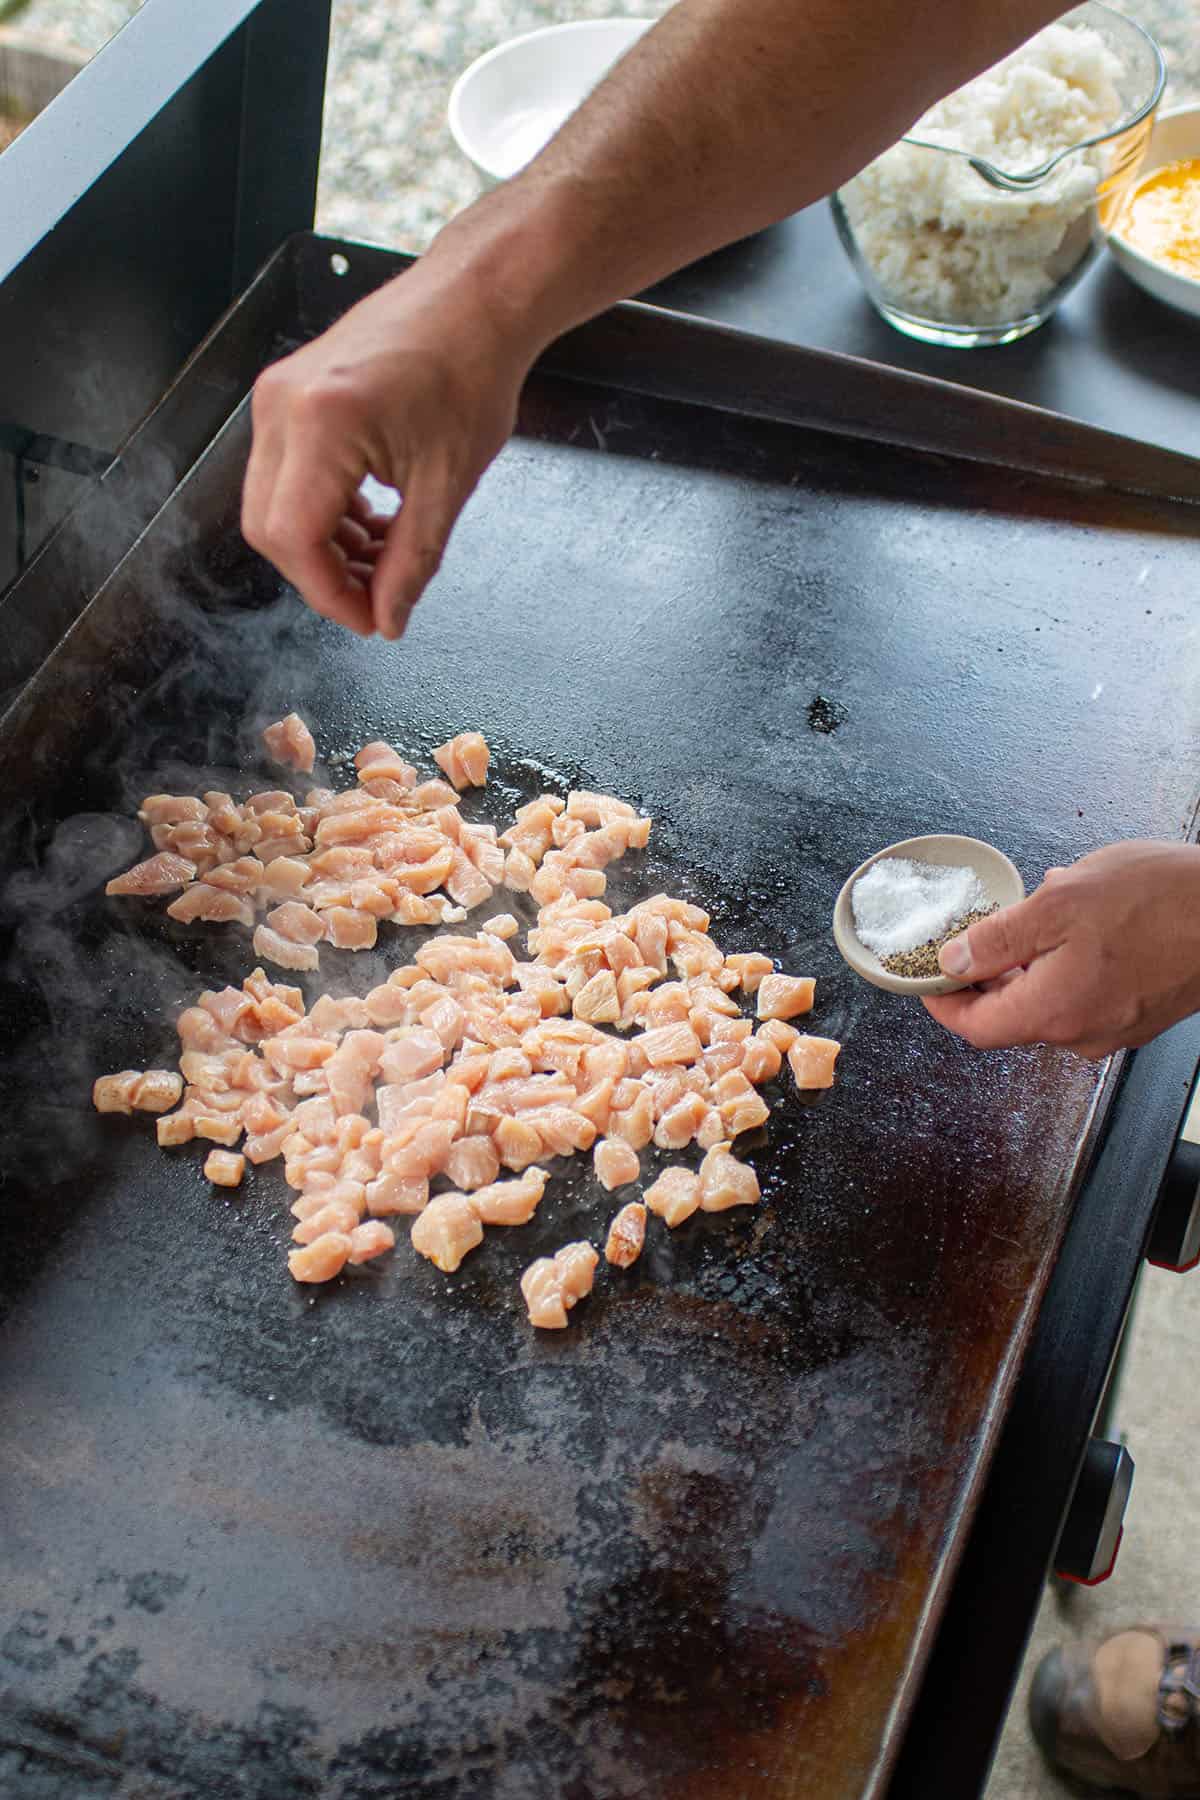 Diced chicken being seasoned with salt and pepper.